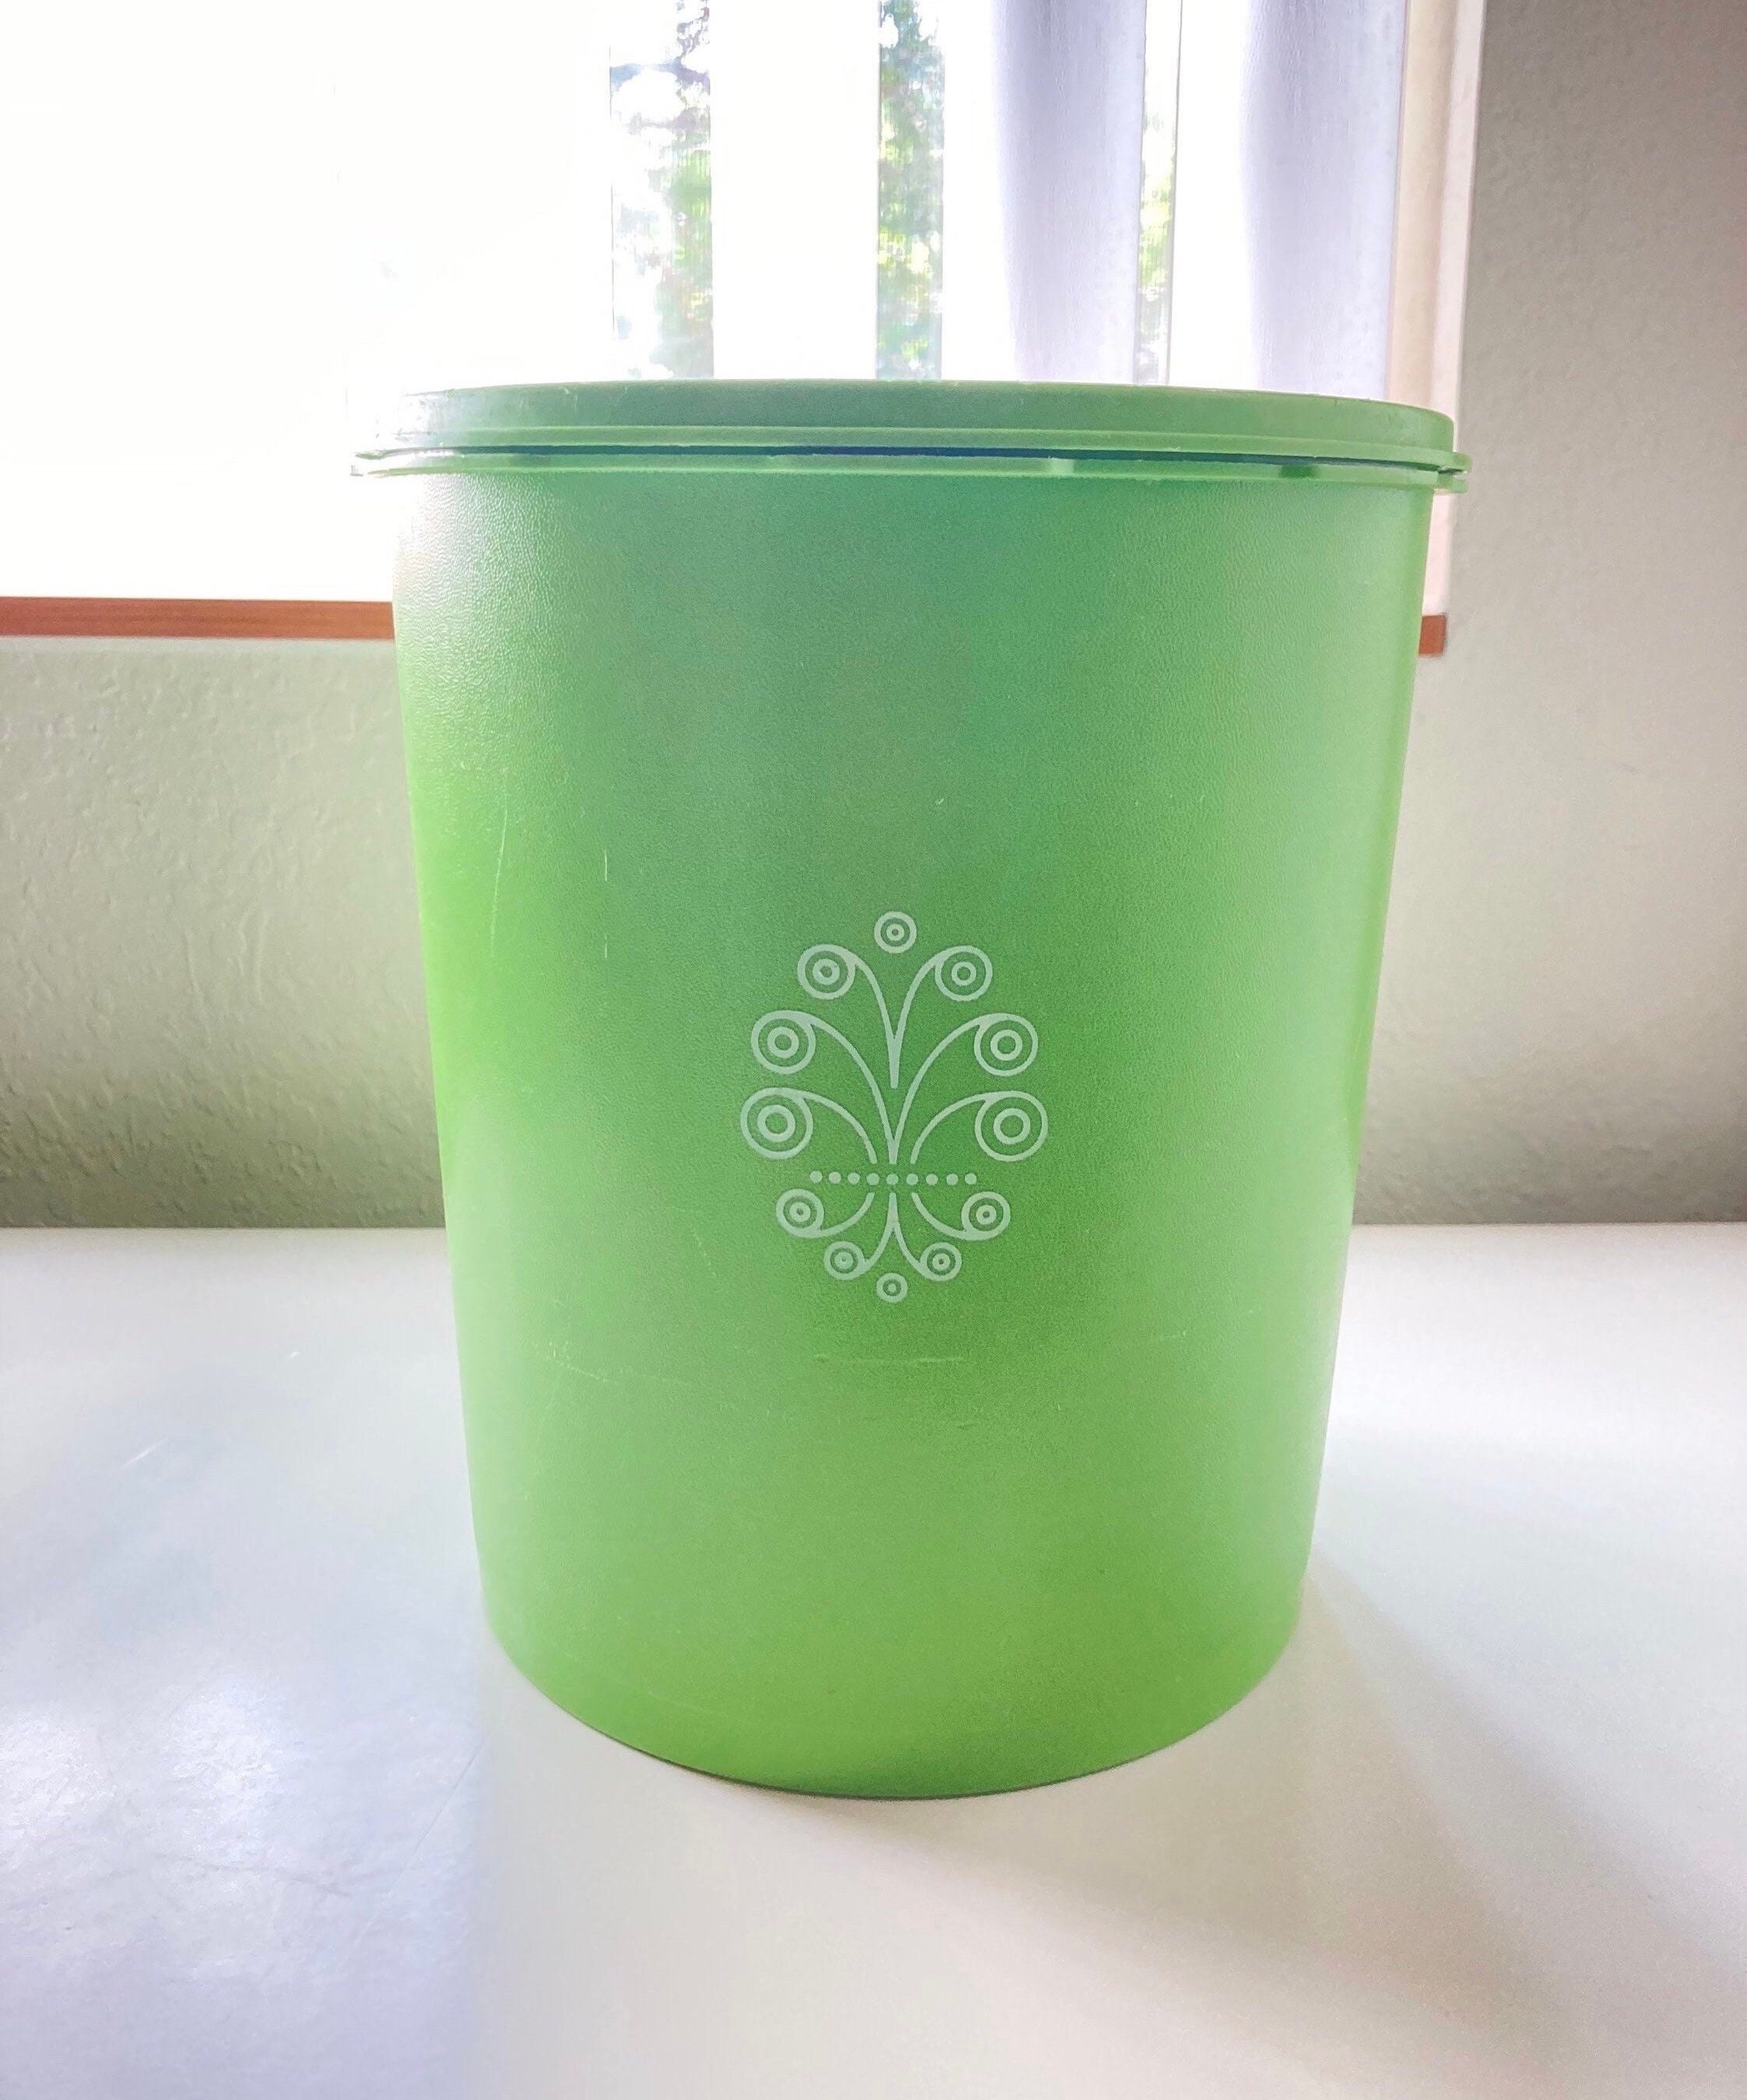 Vintage Tupperware Servalier Canister Container Green Apple